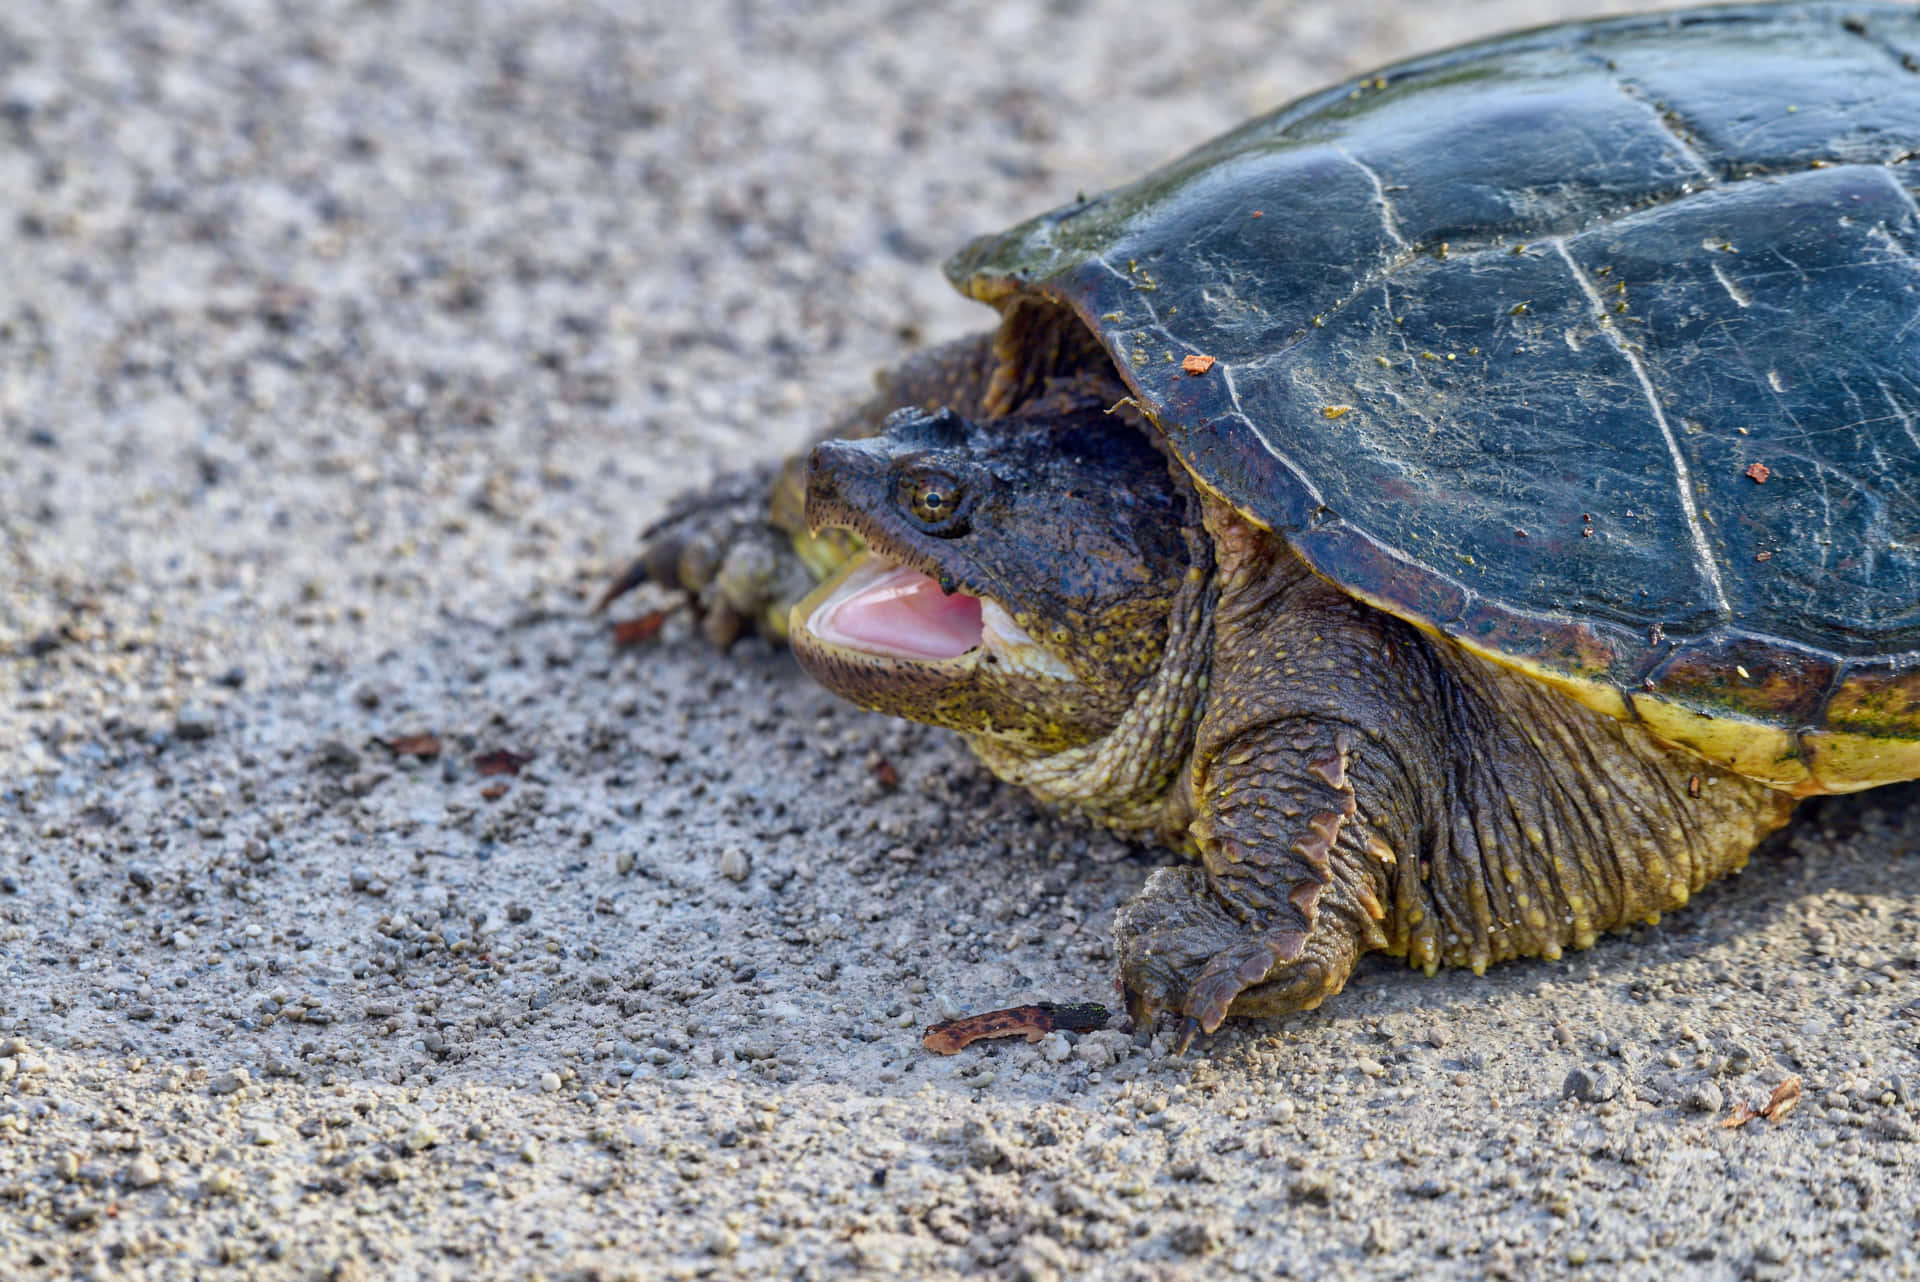 Snapping Turtle On Ground.jpg Wallpaper